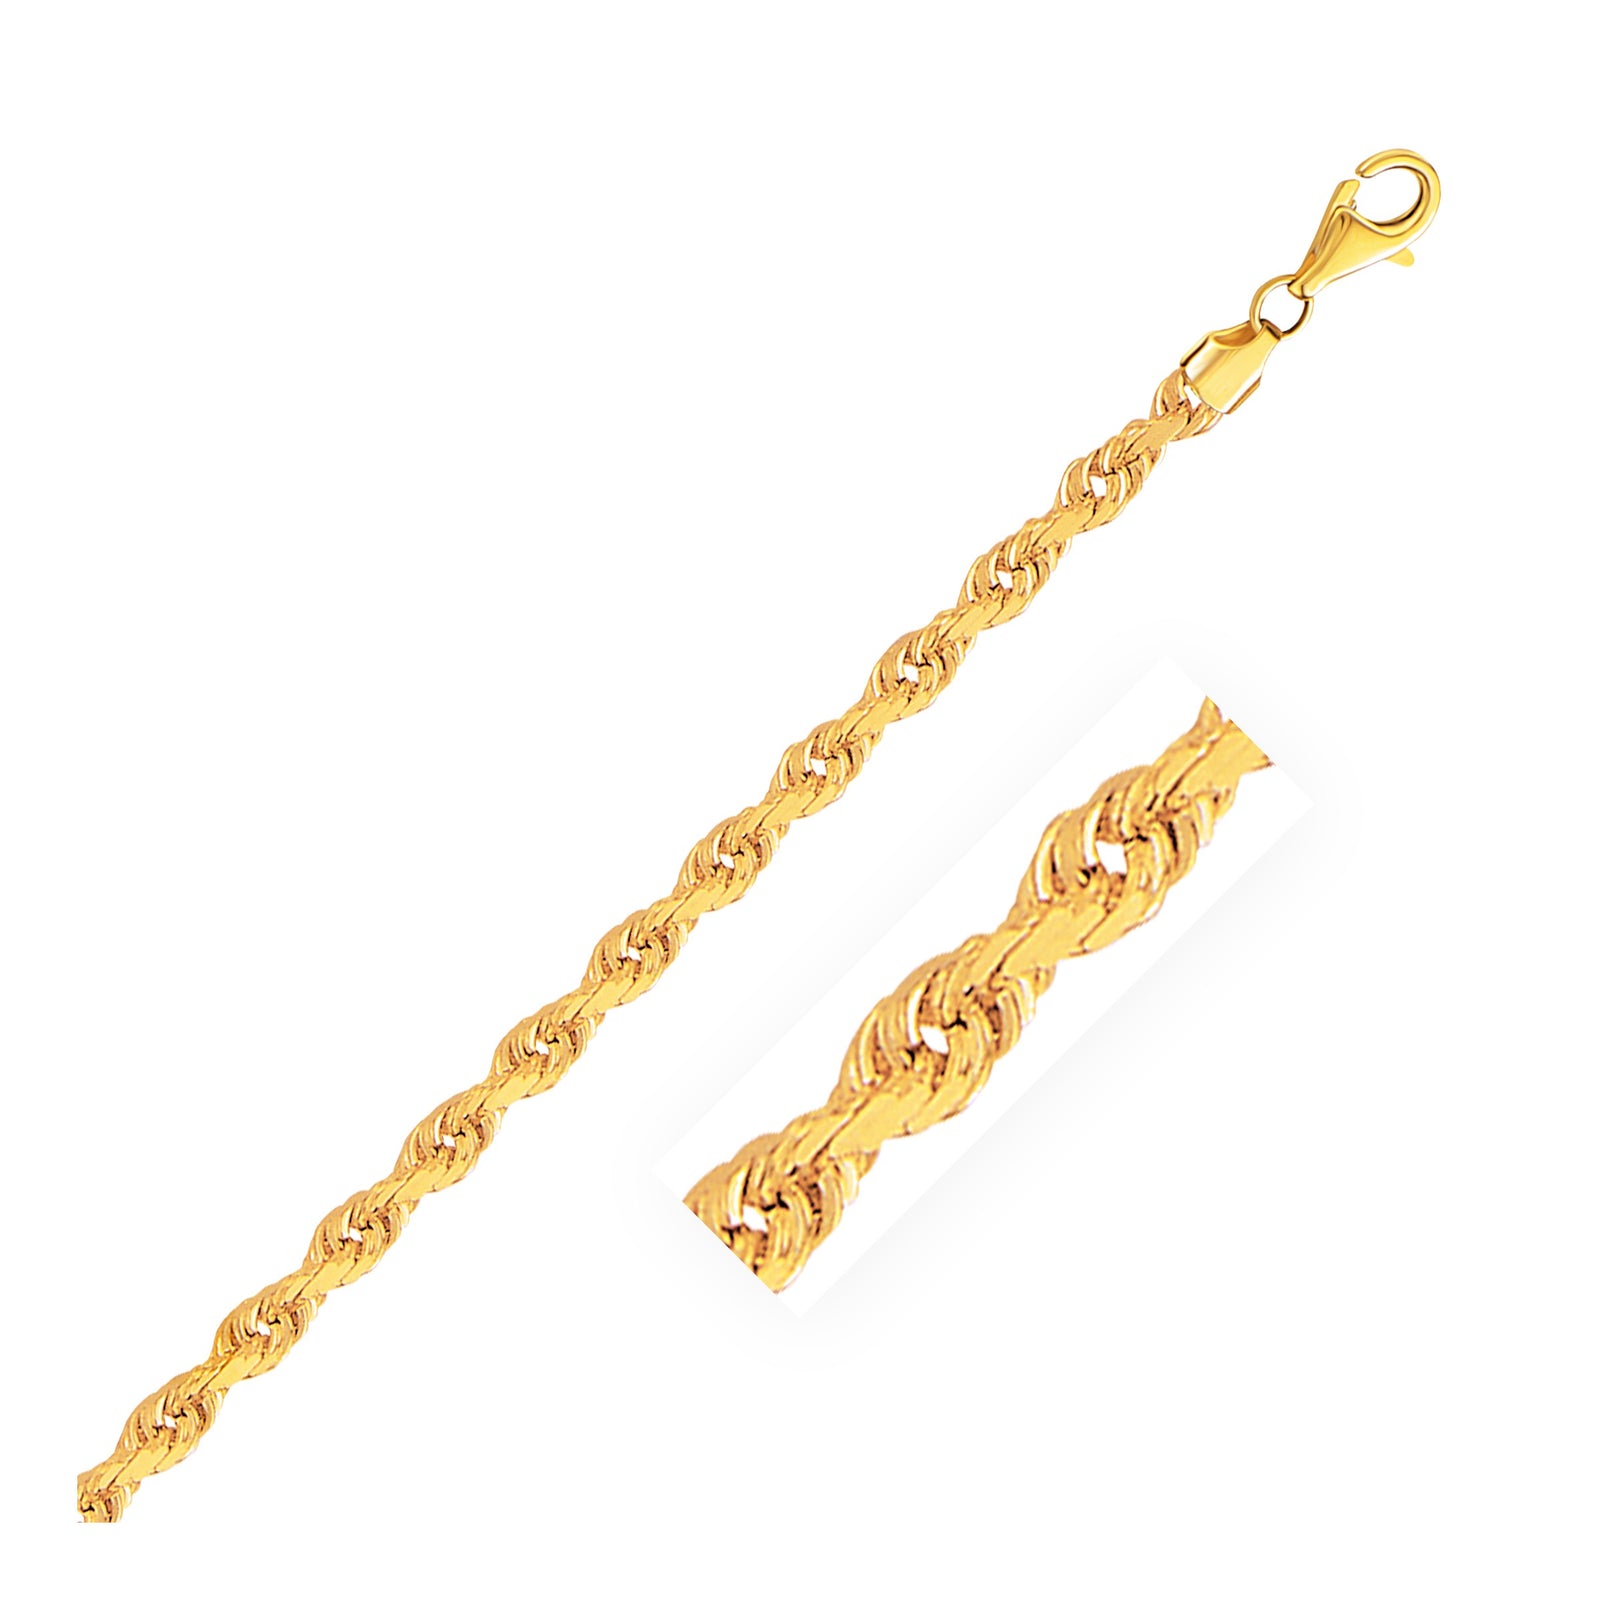 Yellow Gold 10k 4.0mm Solid Diamond Cut Rope Chain in Lobster Claw Lock